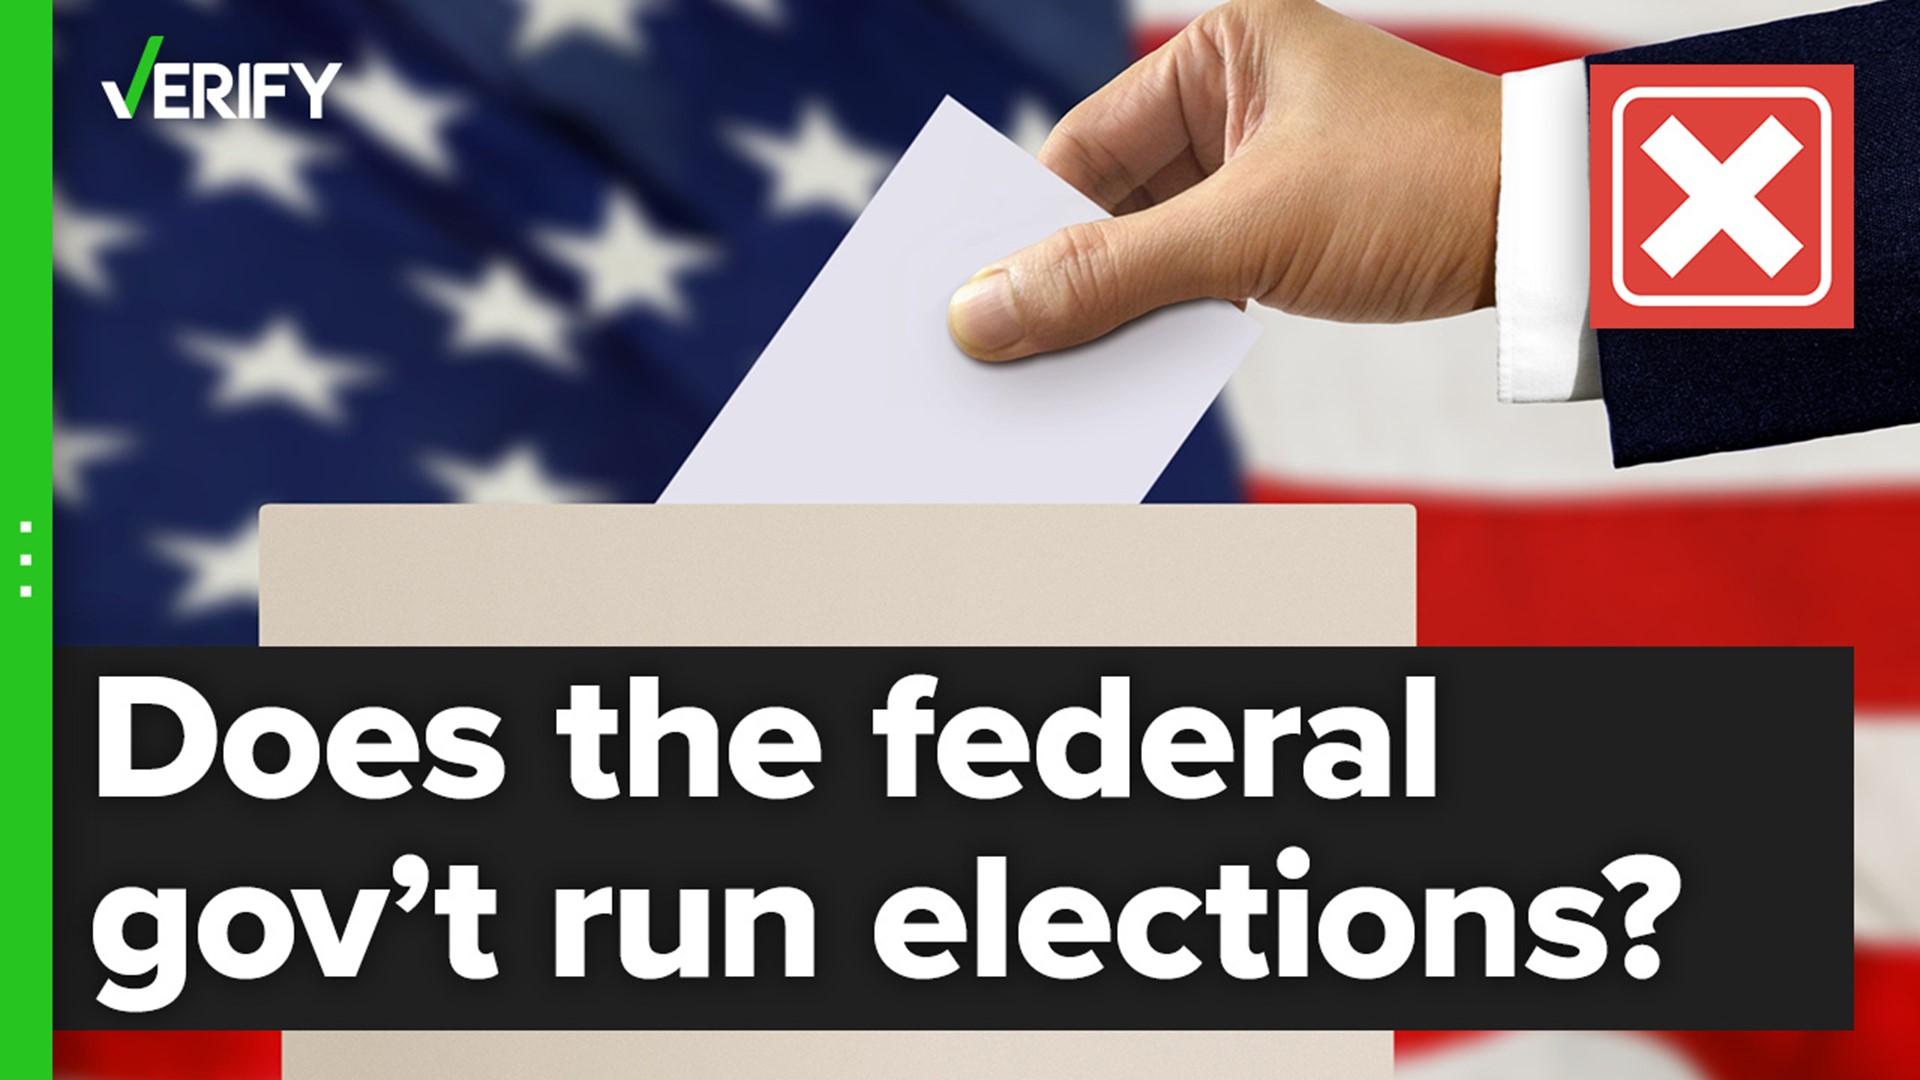 Federal and state elections are administered at the local level, and the specifics of how elections are conducted differ between states.